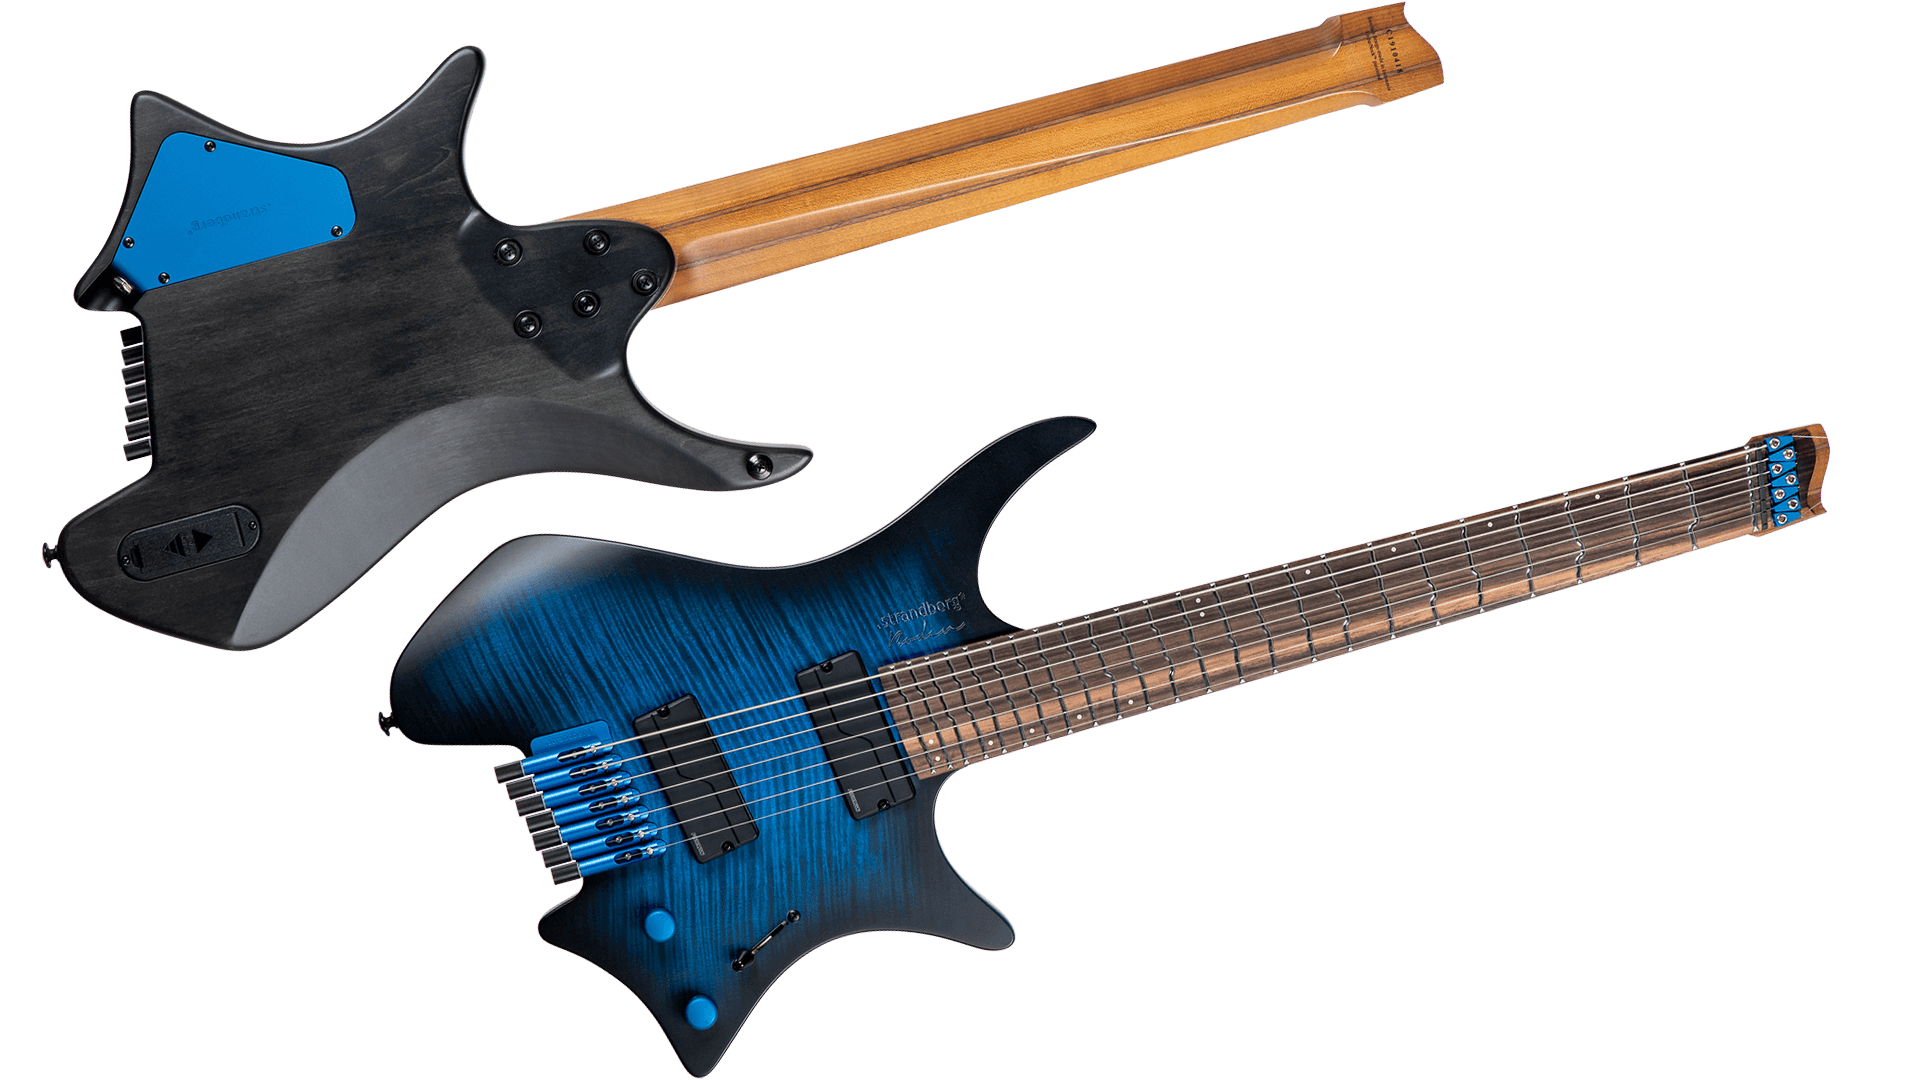 True temp blue burst 7 string headless guitar front and back view